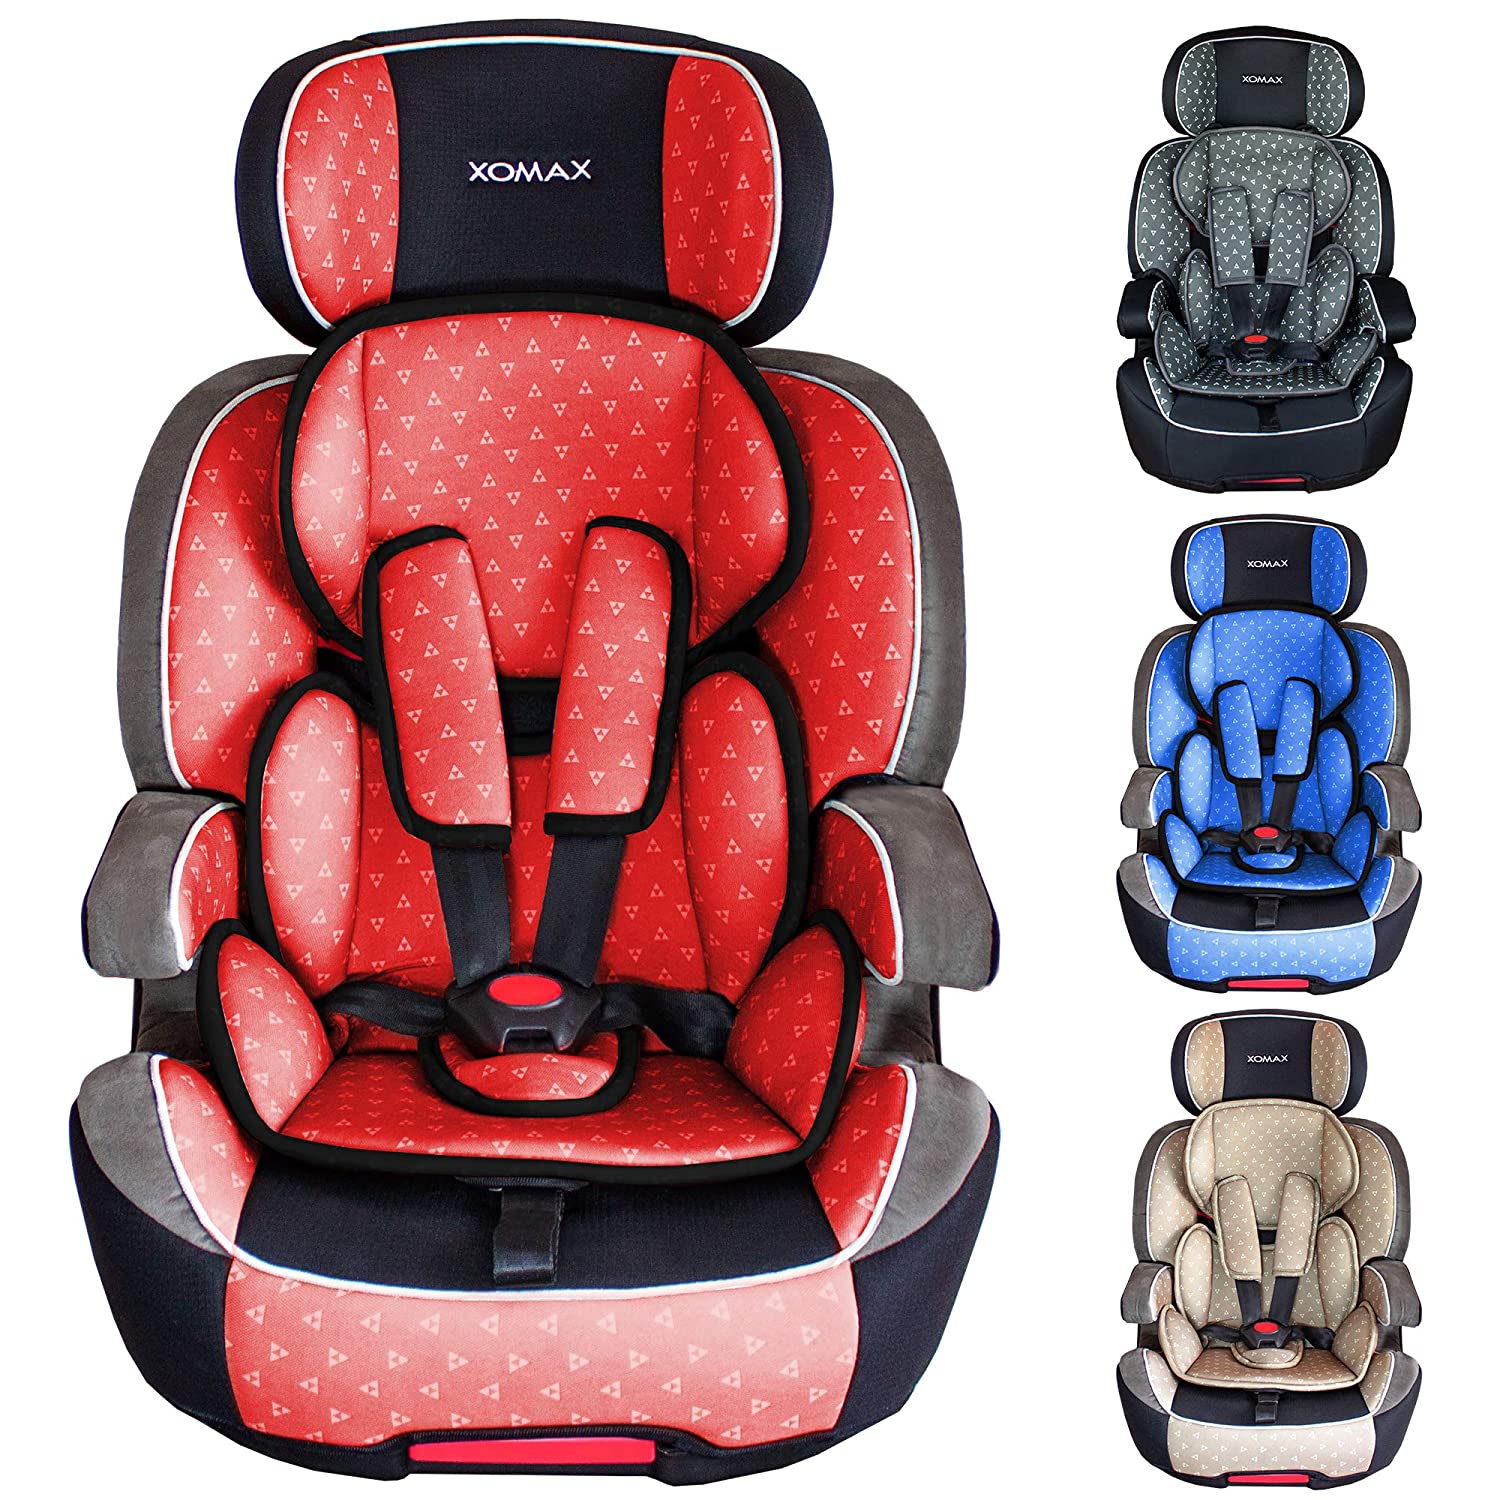 Xomax Xl-518 Childs Seat With Isofix, Grows With Your Child, 9-36 Kg 1-12 